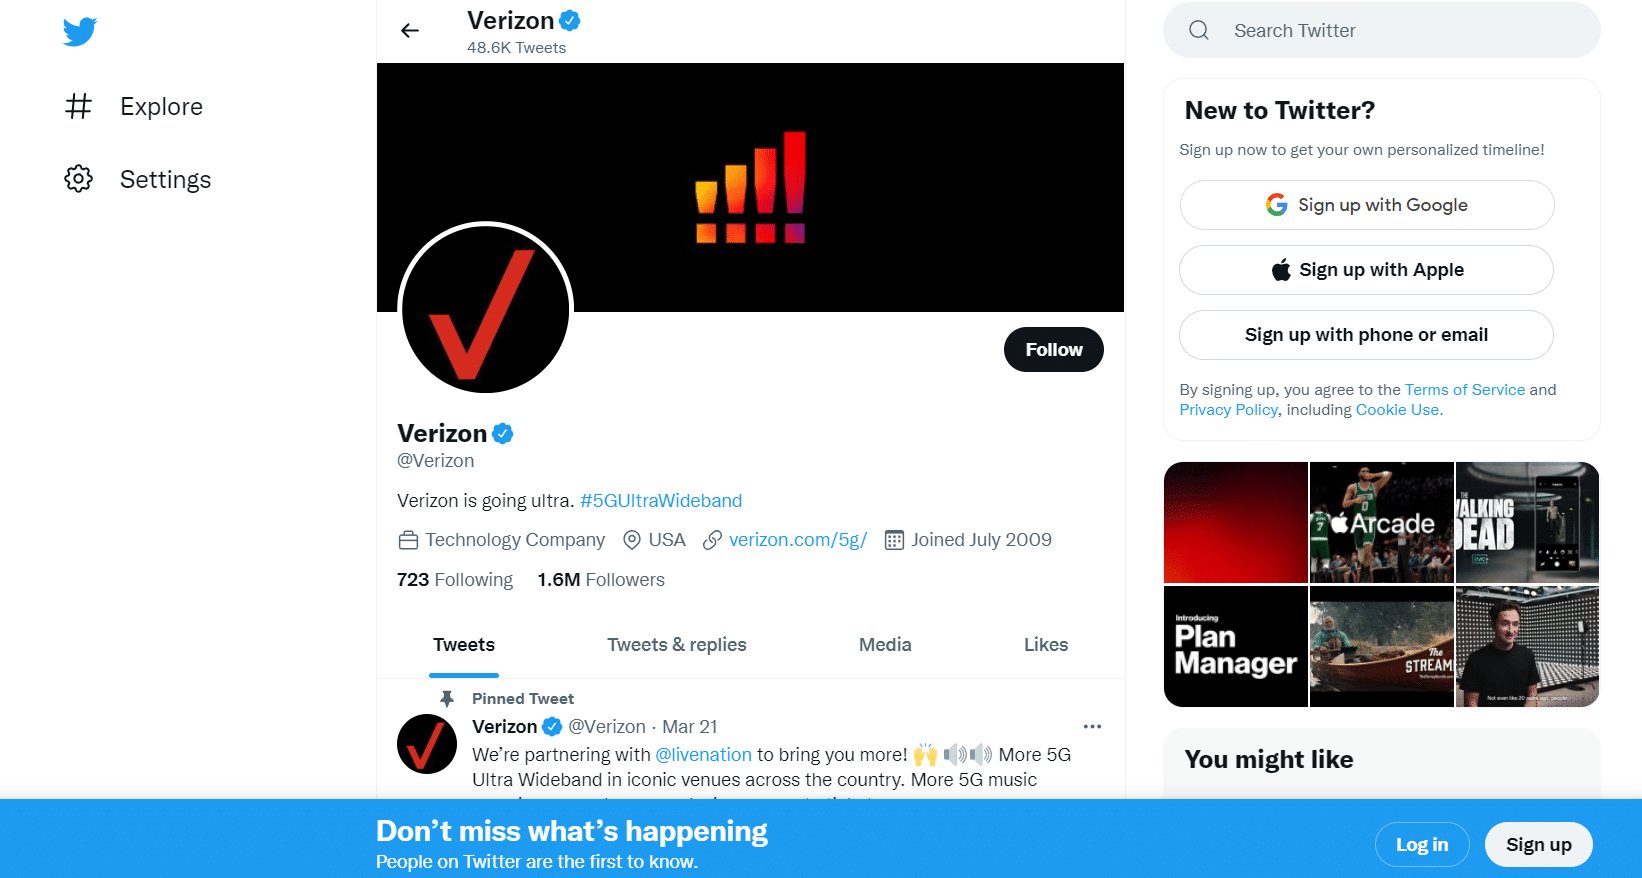 Verizon Twitter page. how to speak to a person when you call Verizon